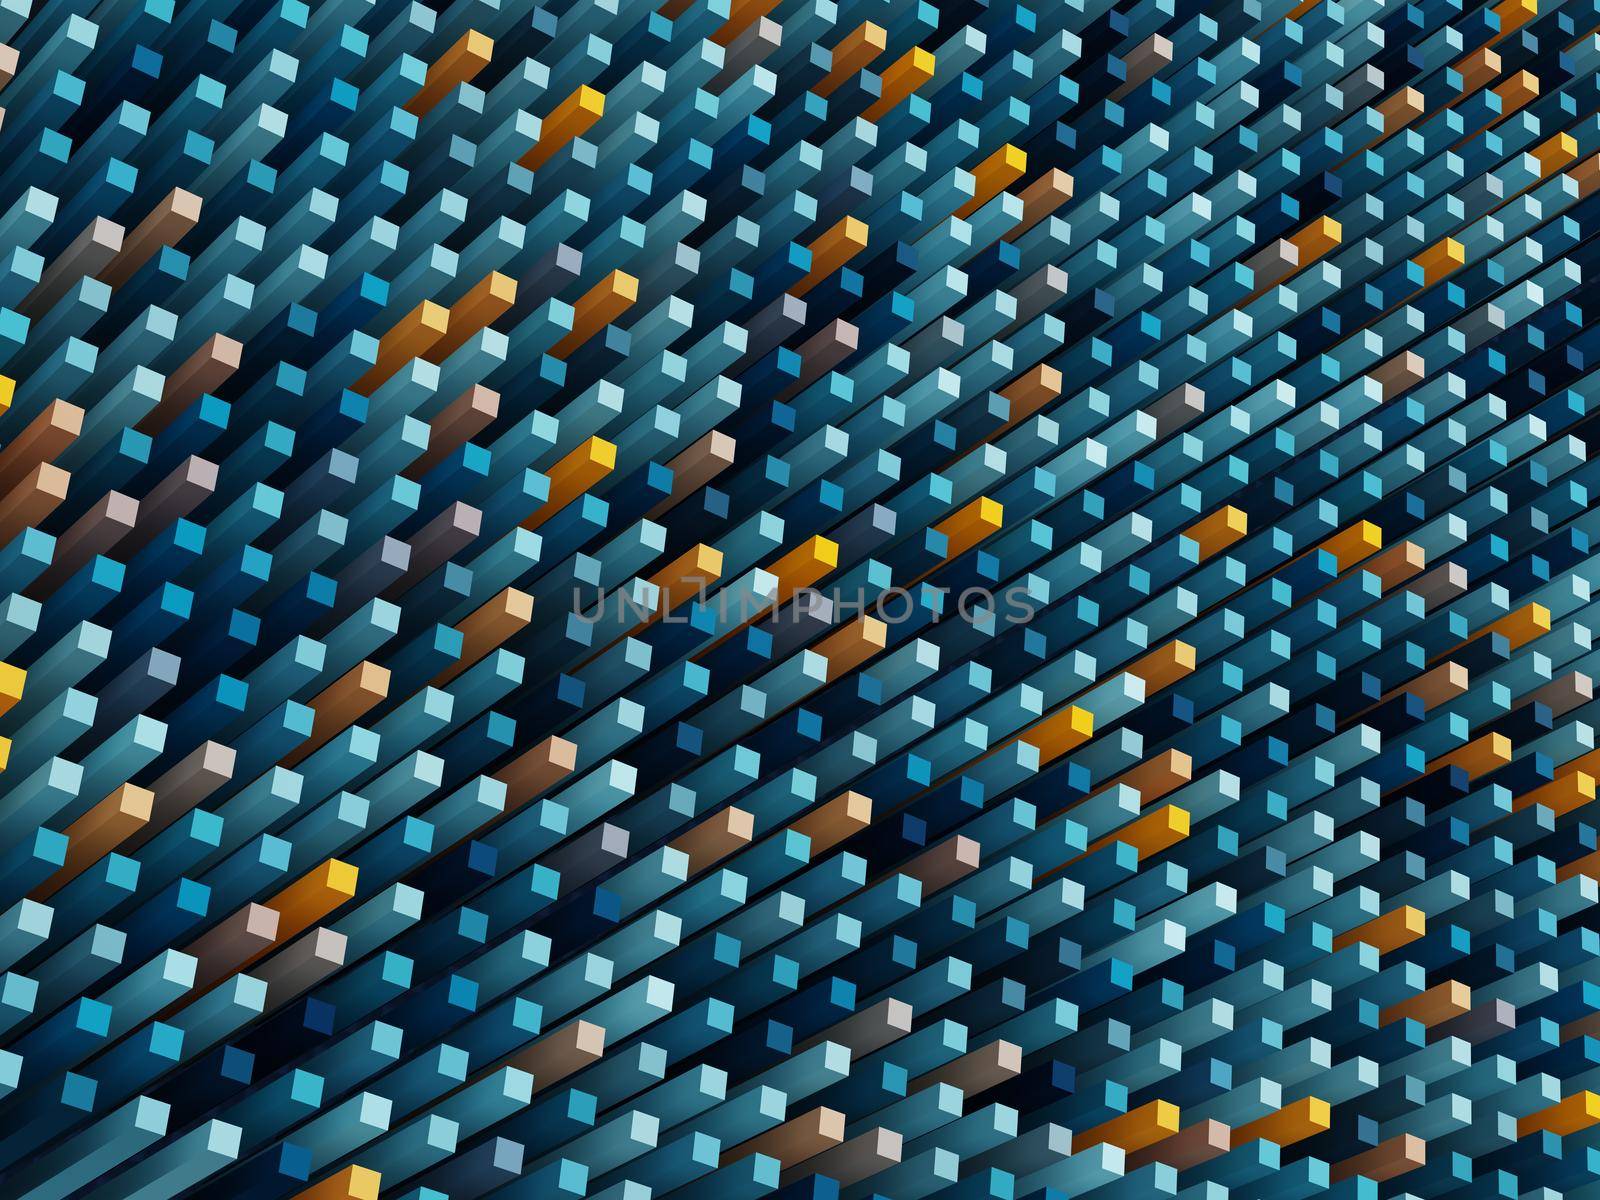 3d abstract mosaic structure. Trendy blue and yallow futuristic background by Xeniasnowstorm